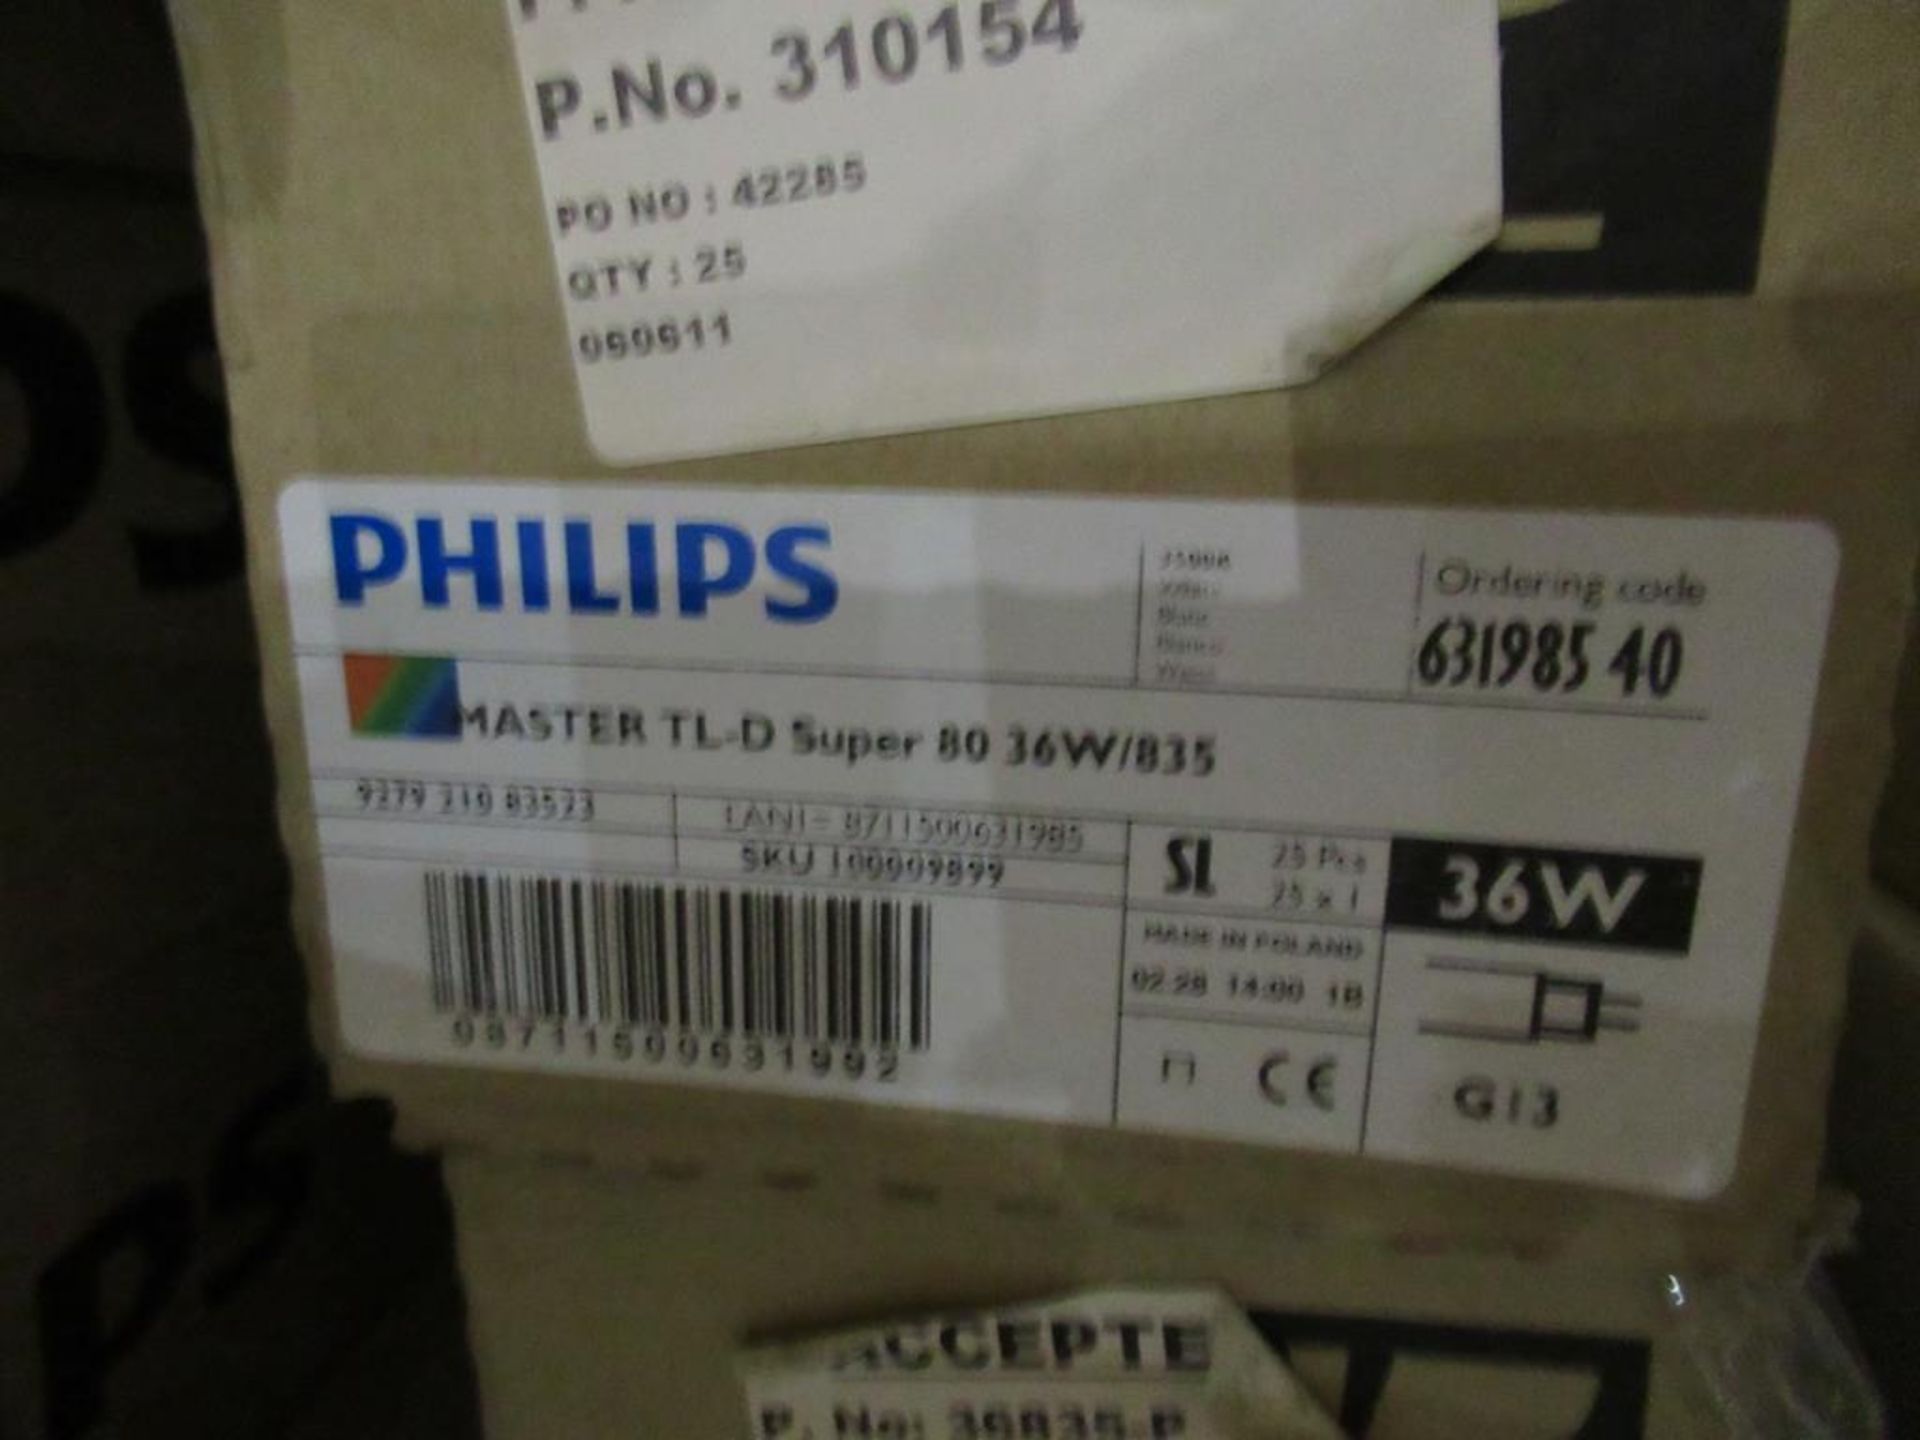 75 x Philips Master TL-D Super 58W G13 3500K OEM Trade Price £169 - Image 2 of 3